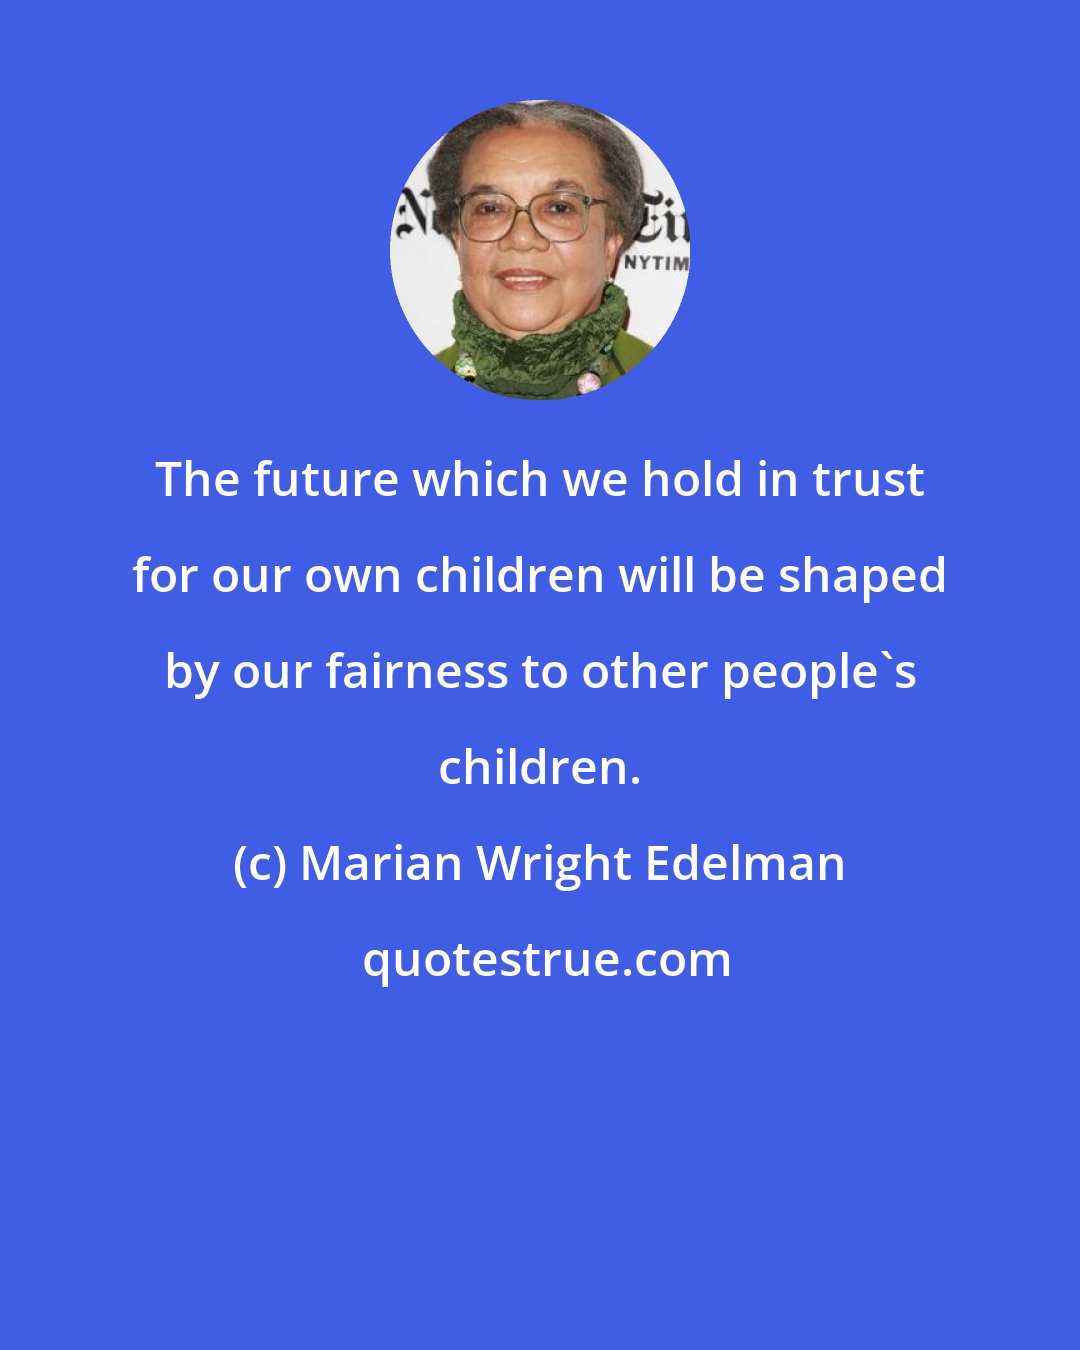 Marian Wright Edelman: The future which we hold in trust for our own children will be shaped by our fairness to other people's children.